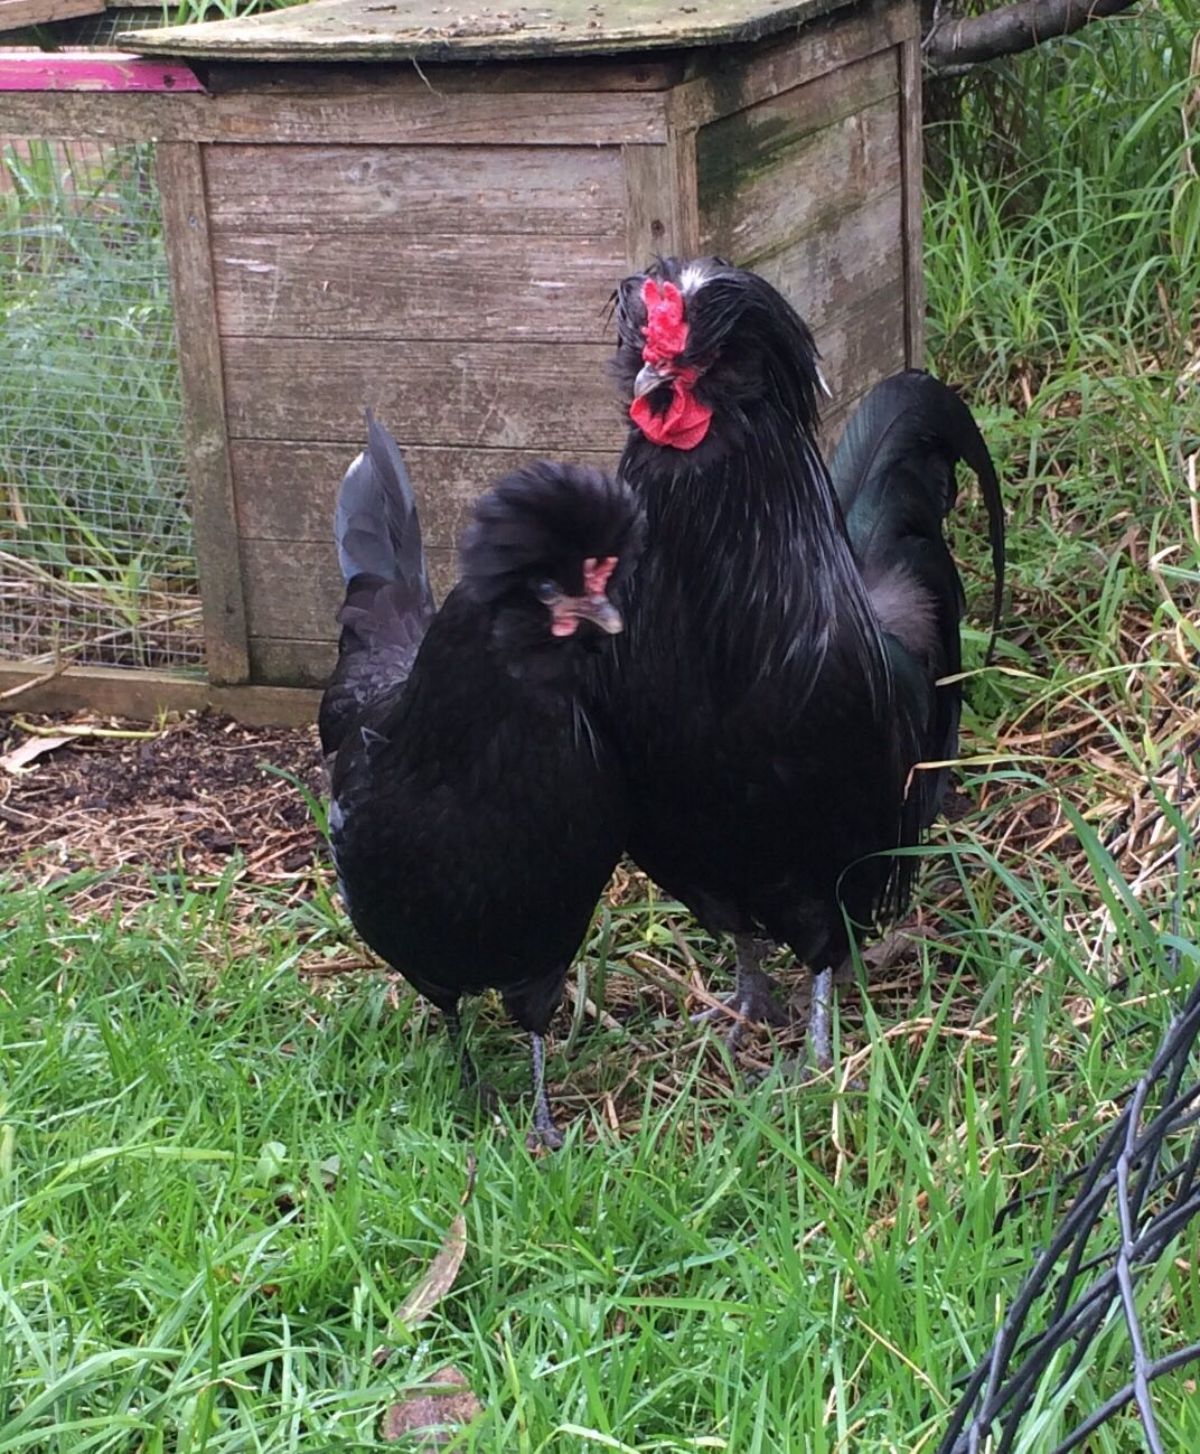 A Crevecoeur rooster and a Crevecoeur hen in a backyard.